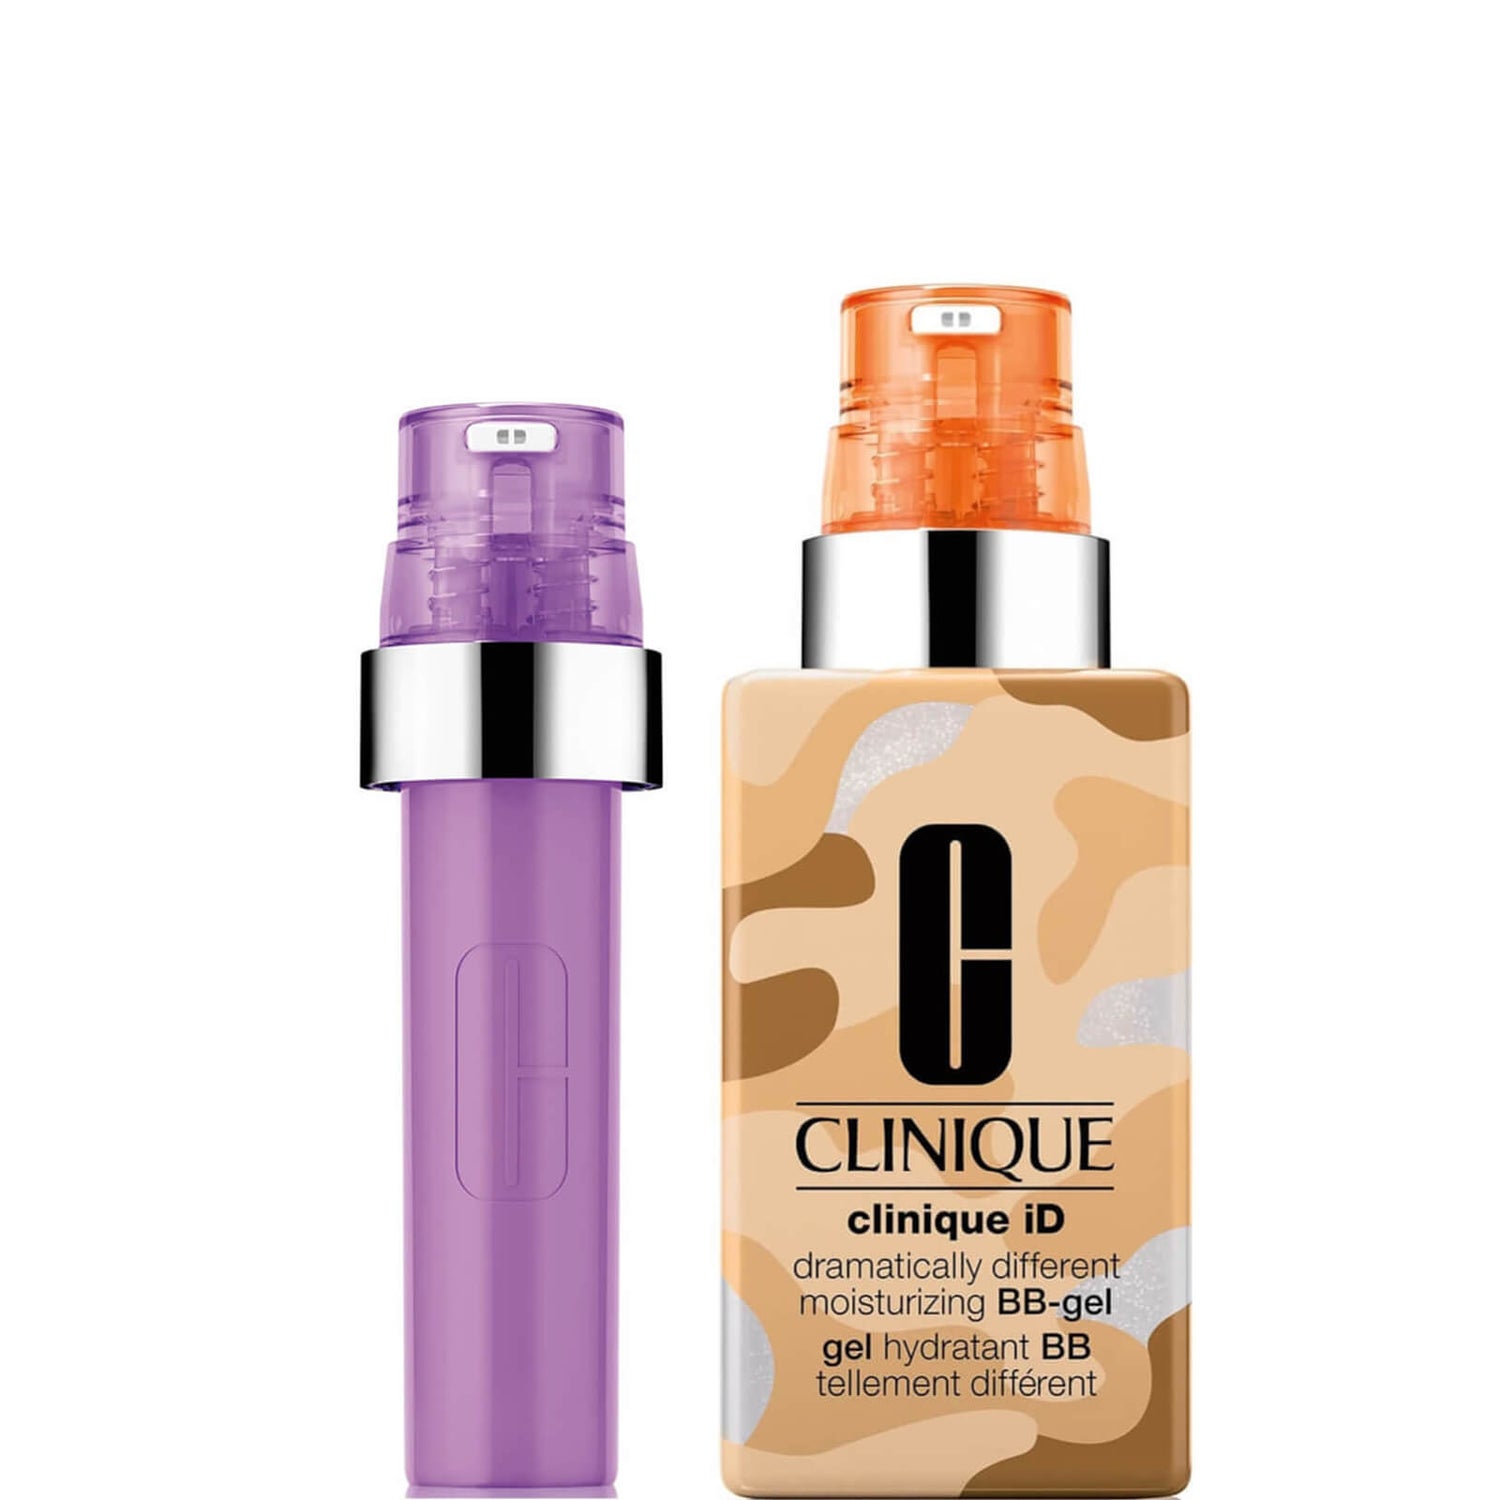 Clinique iD Dramatically Different Moisturising BB-Gel and Active Cartridge Concentrate for Lines and Wrinkles Bundle